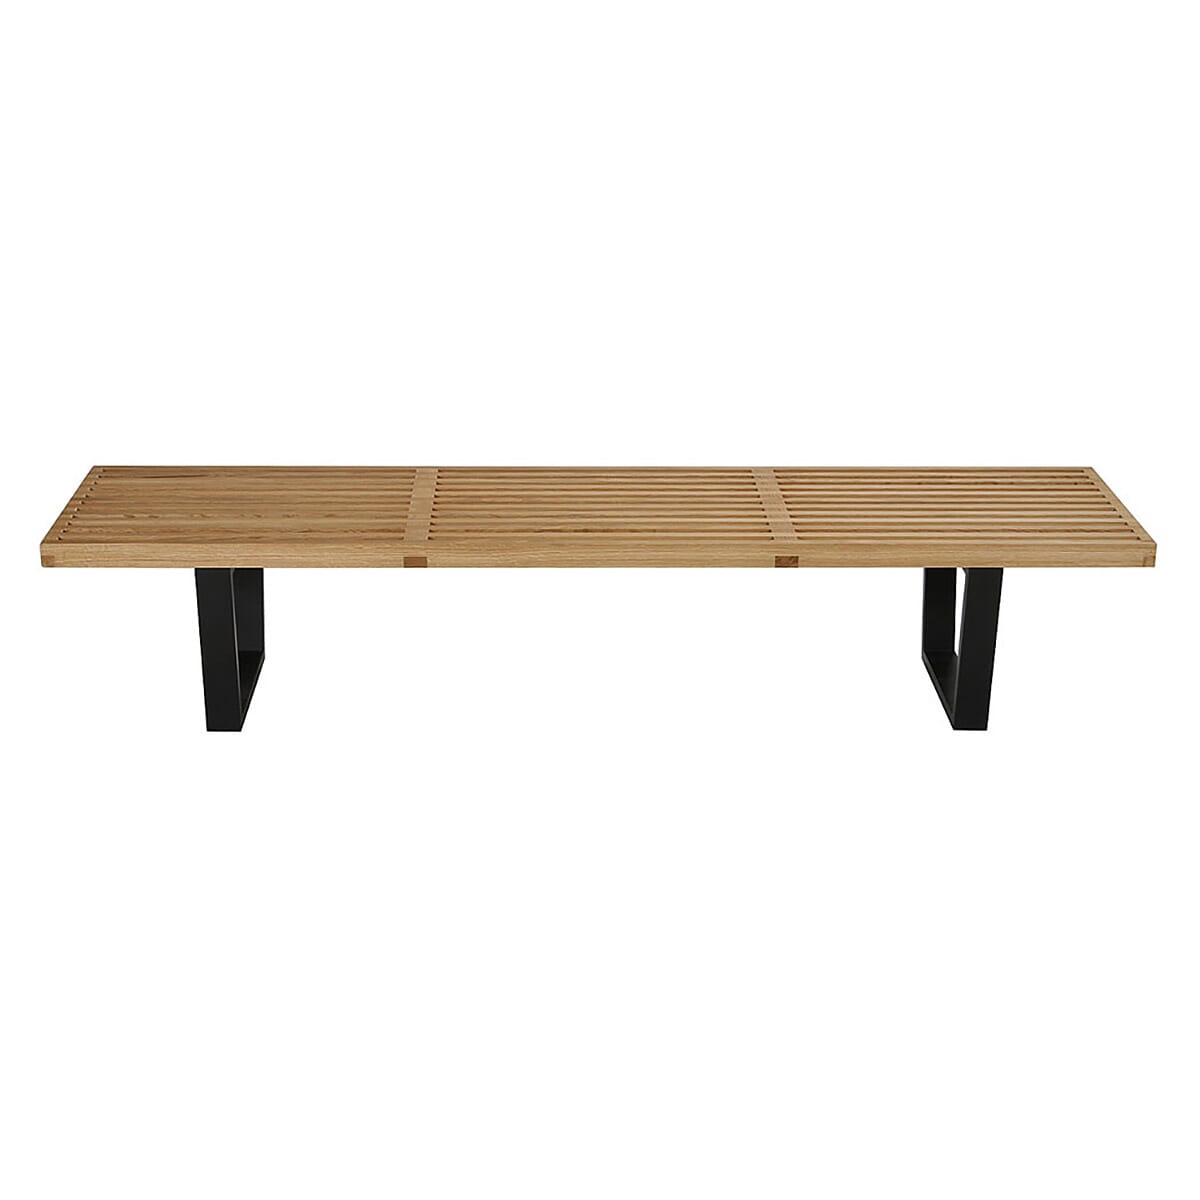 G Scale Garden Bench Large